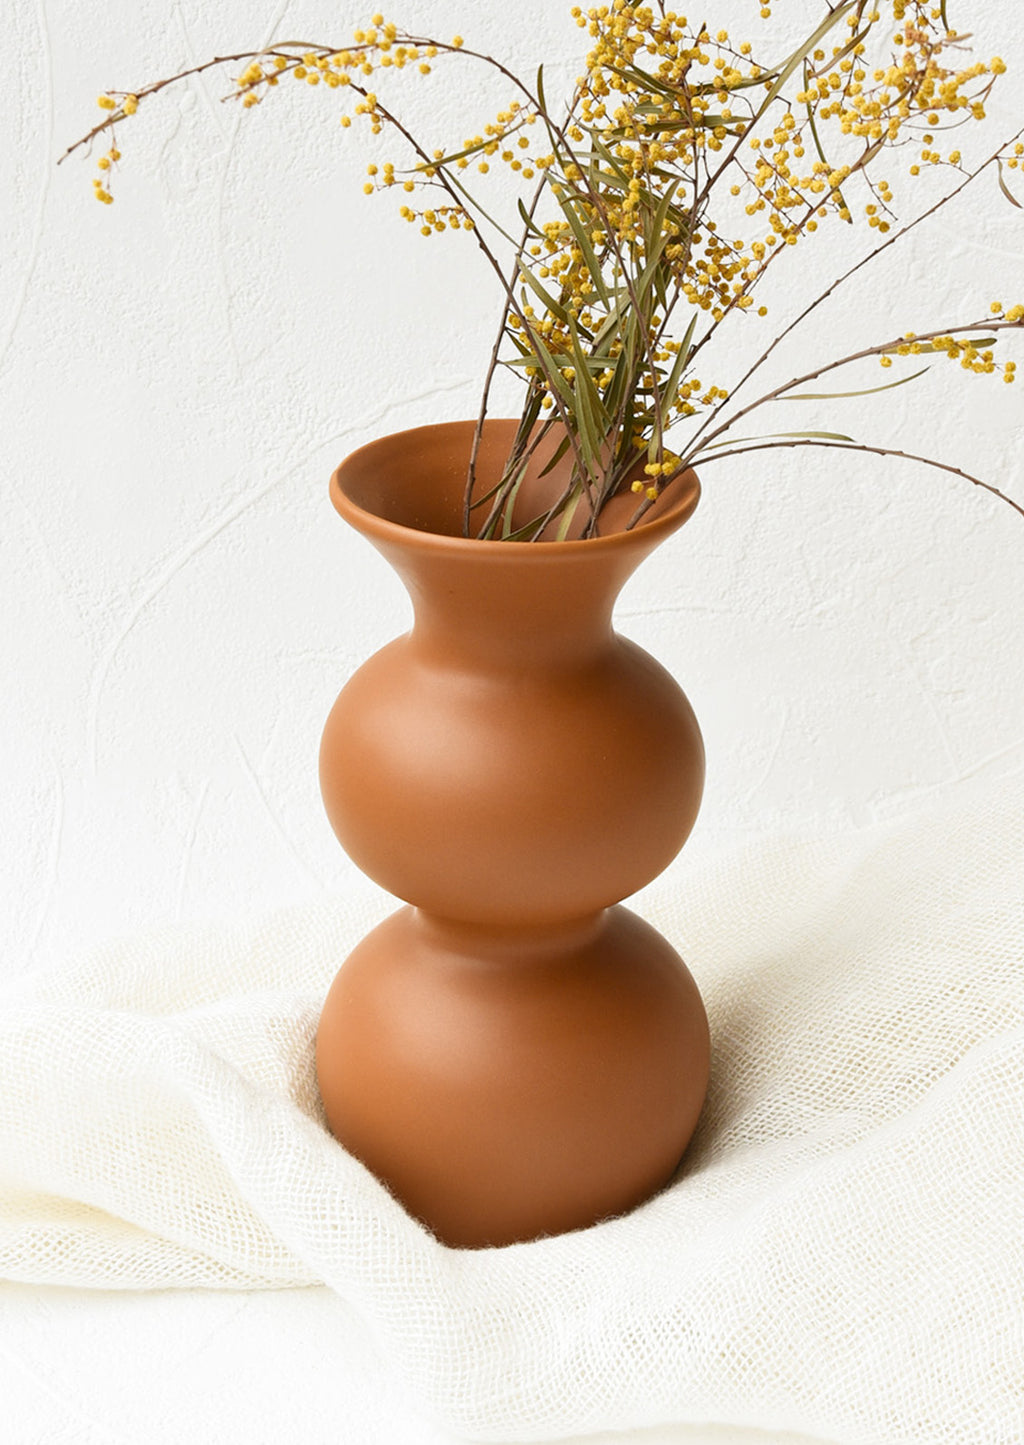 2: An hourglass shaped vase in terracotta filled with yellow flowers